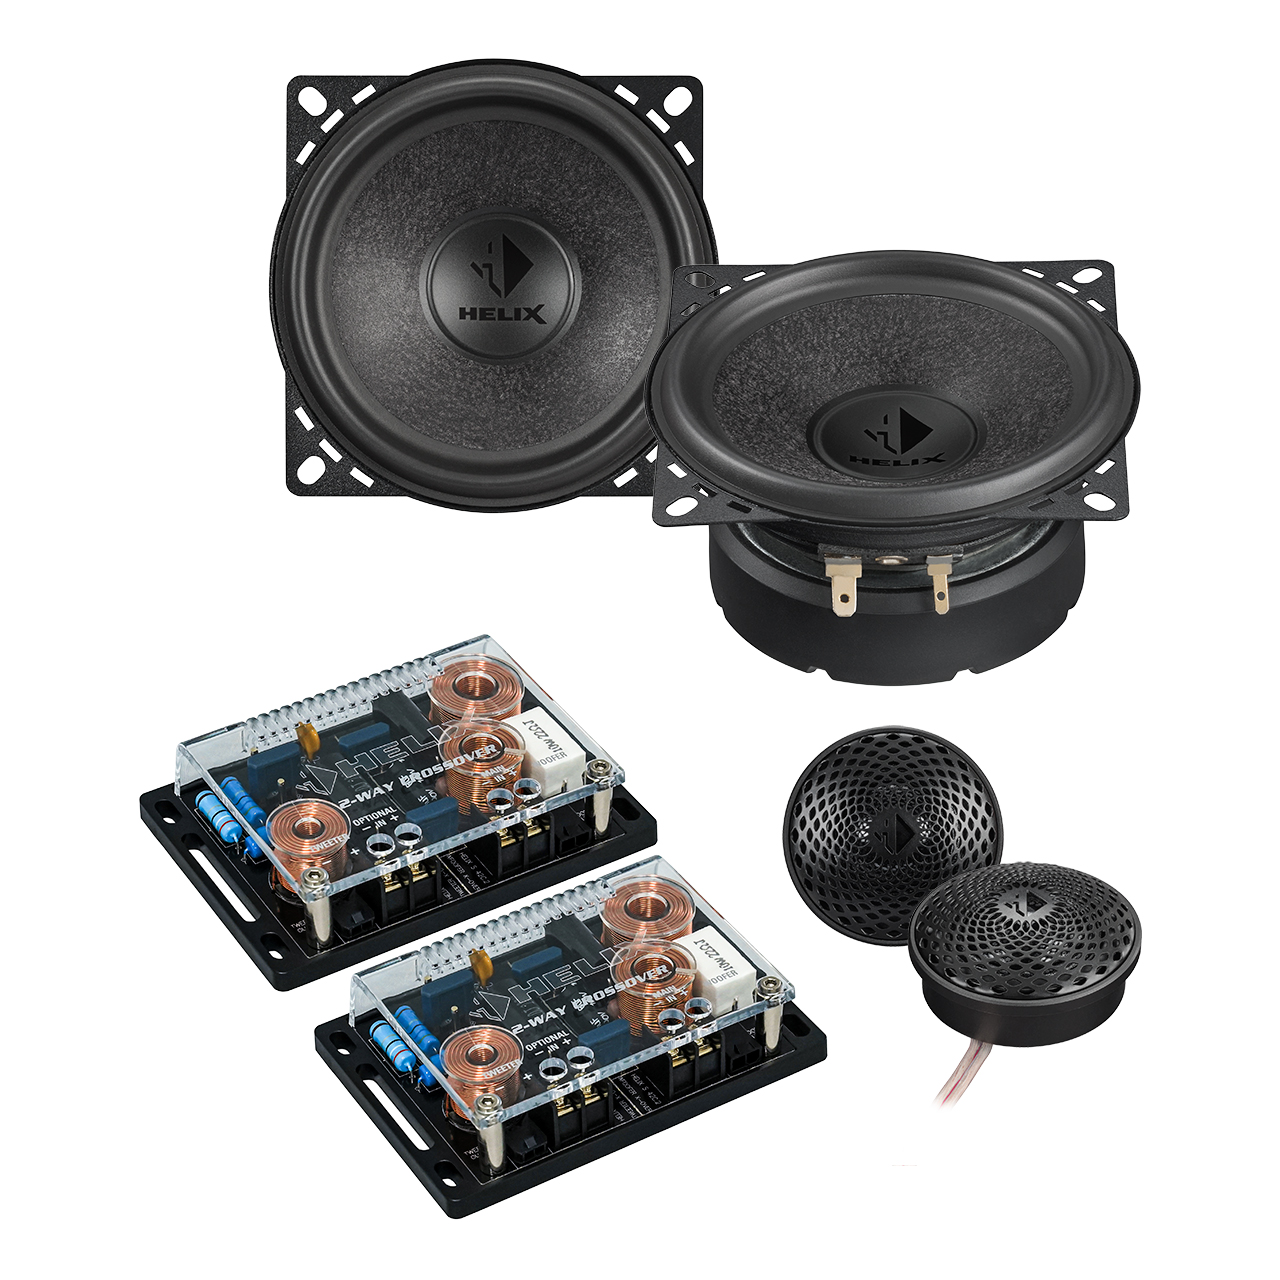 HELIX S 42C.2, 2-way component system